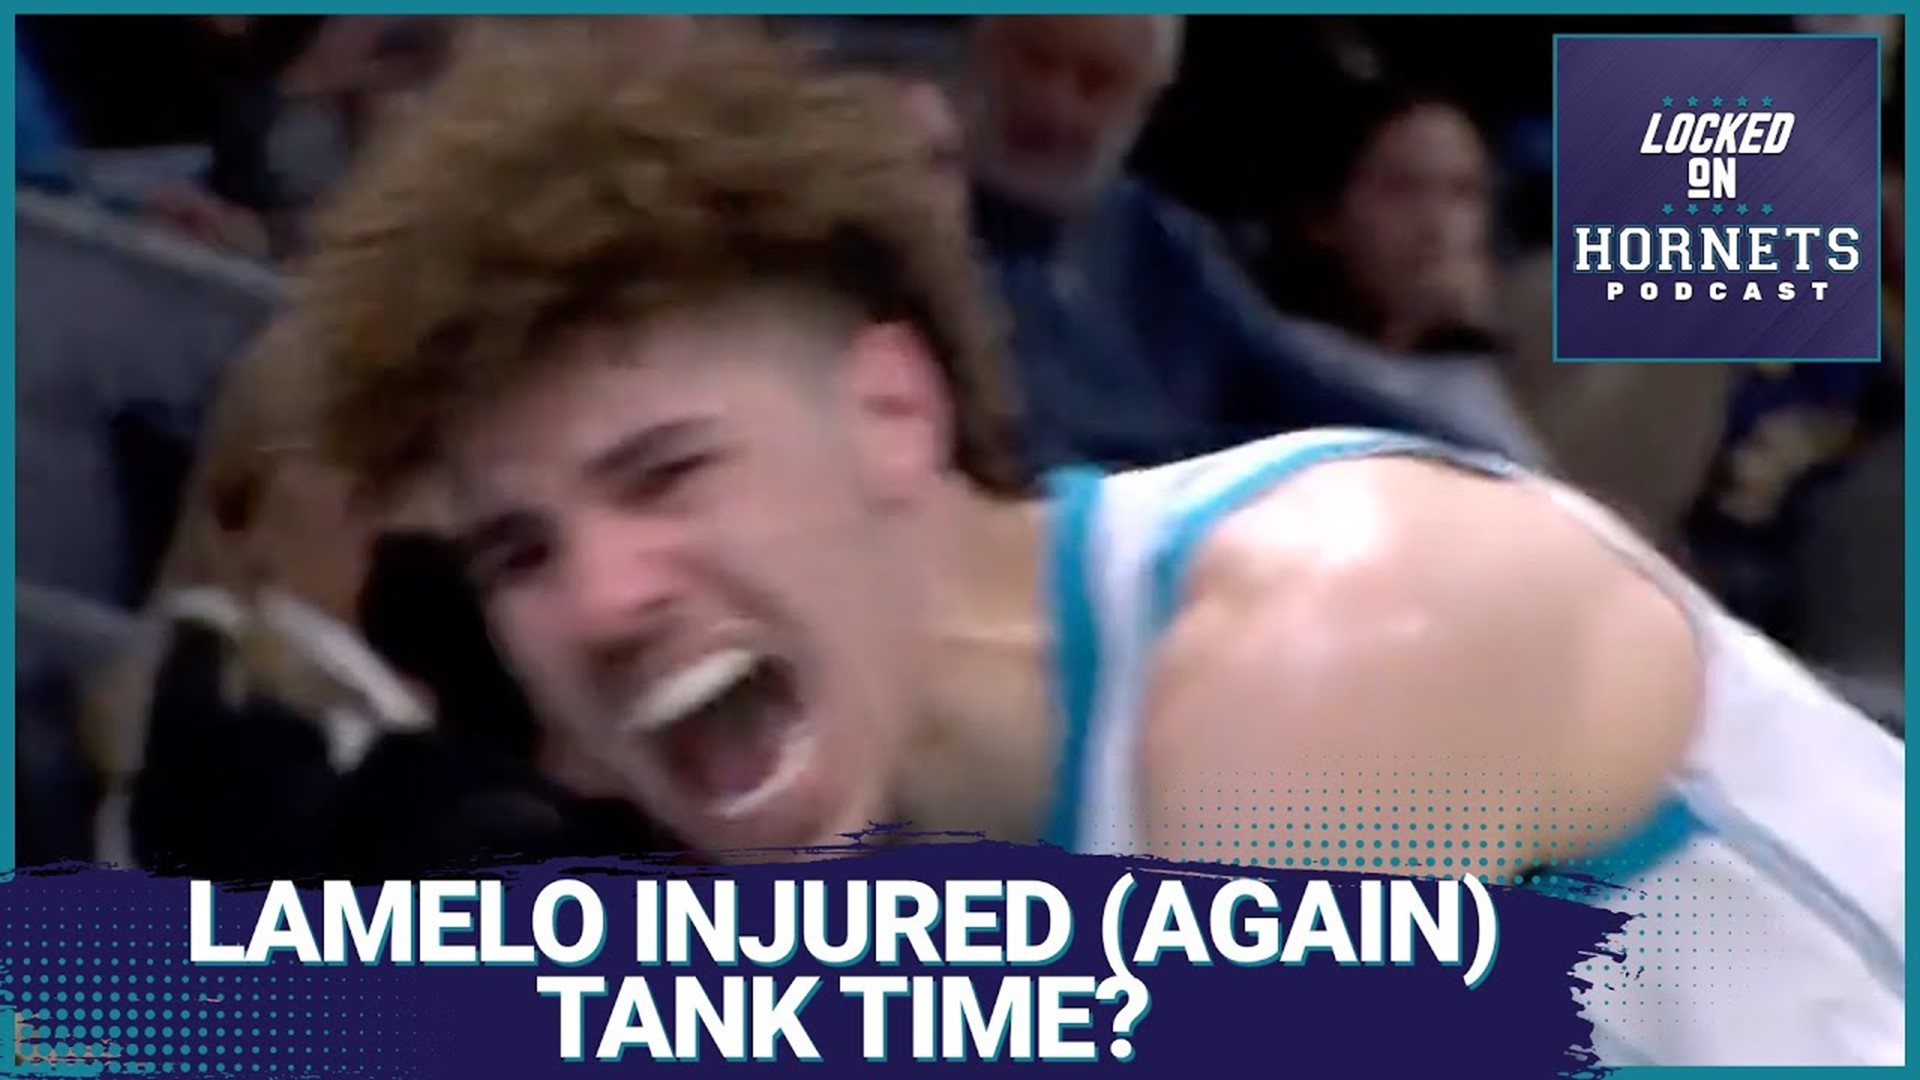 alker and Doug discuss the potential fallout of LaMelo Ball's injury to the same ankle that held him out for a month.